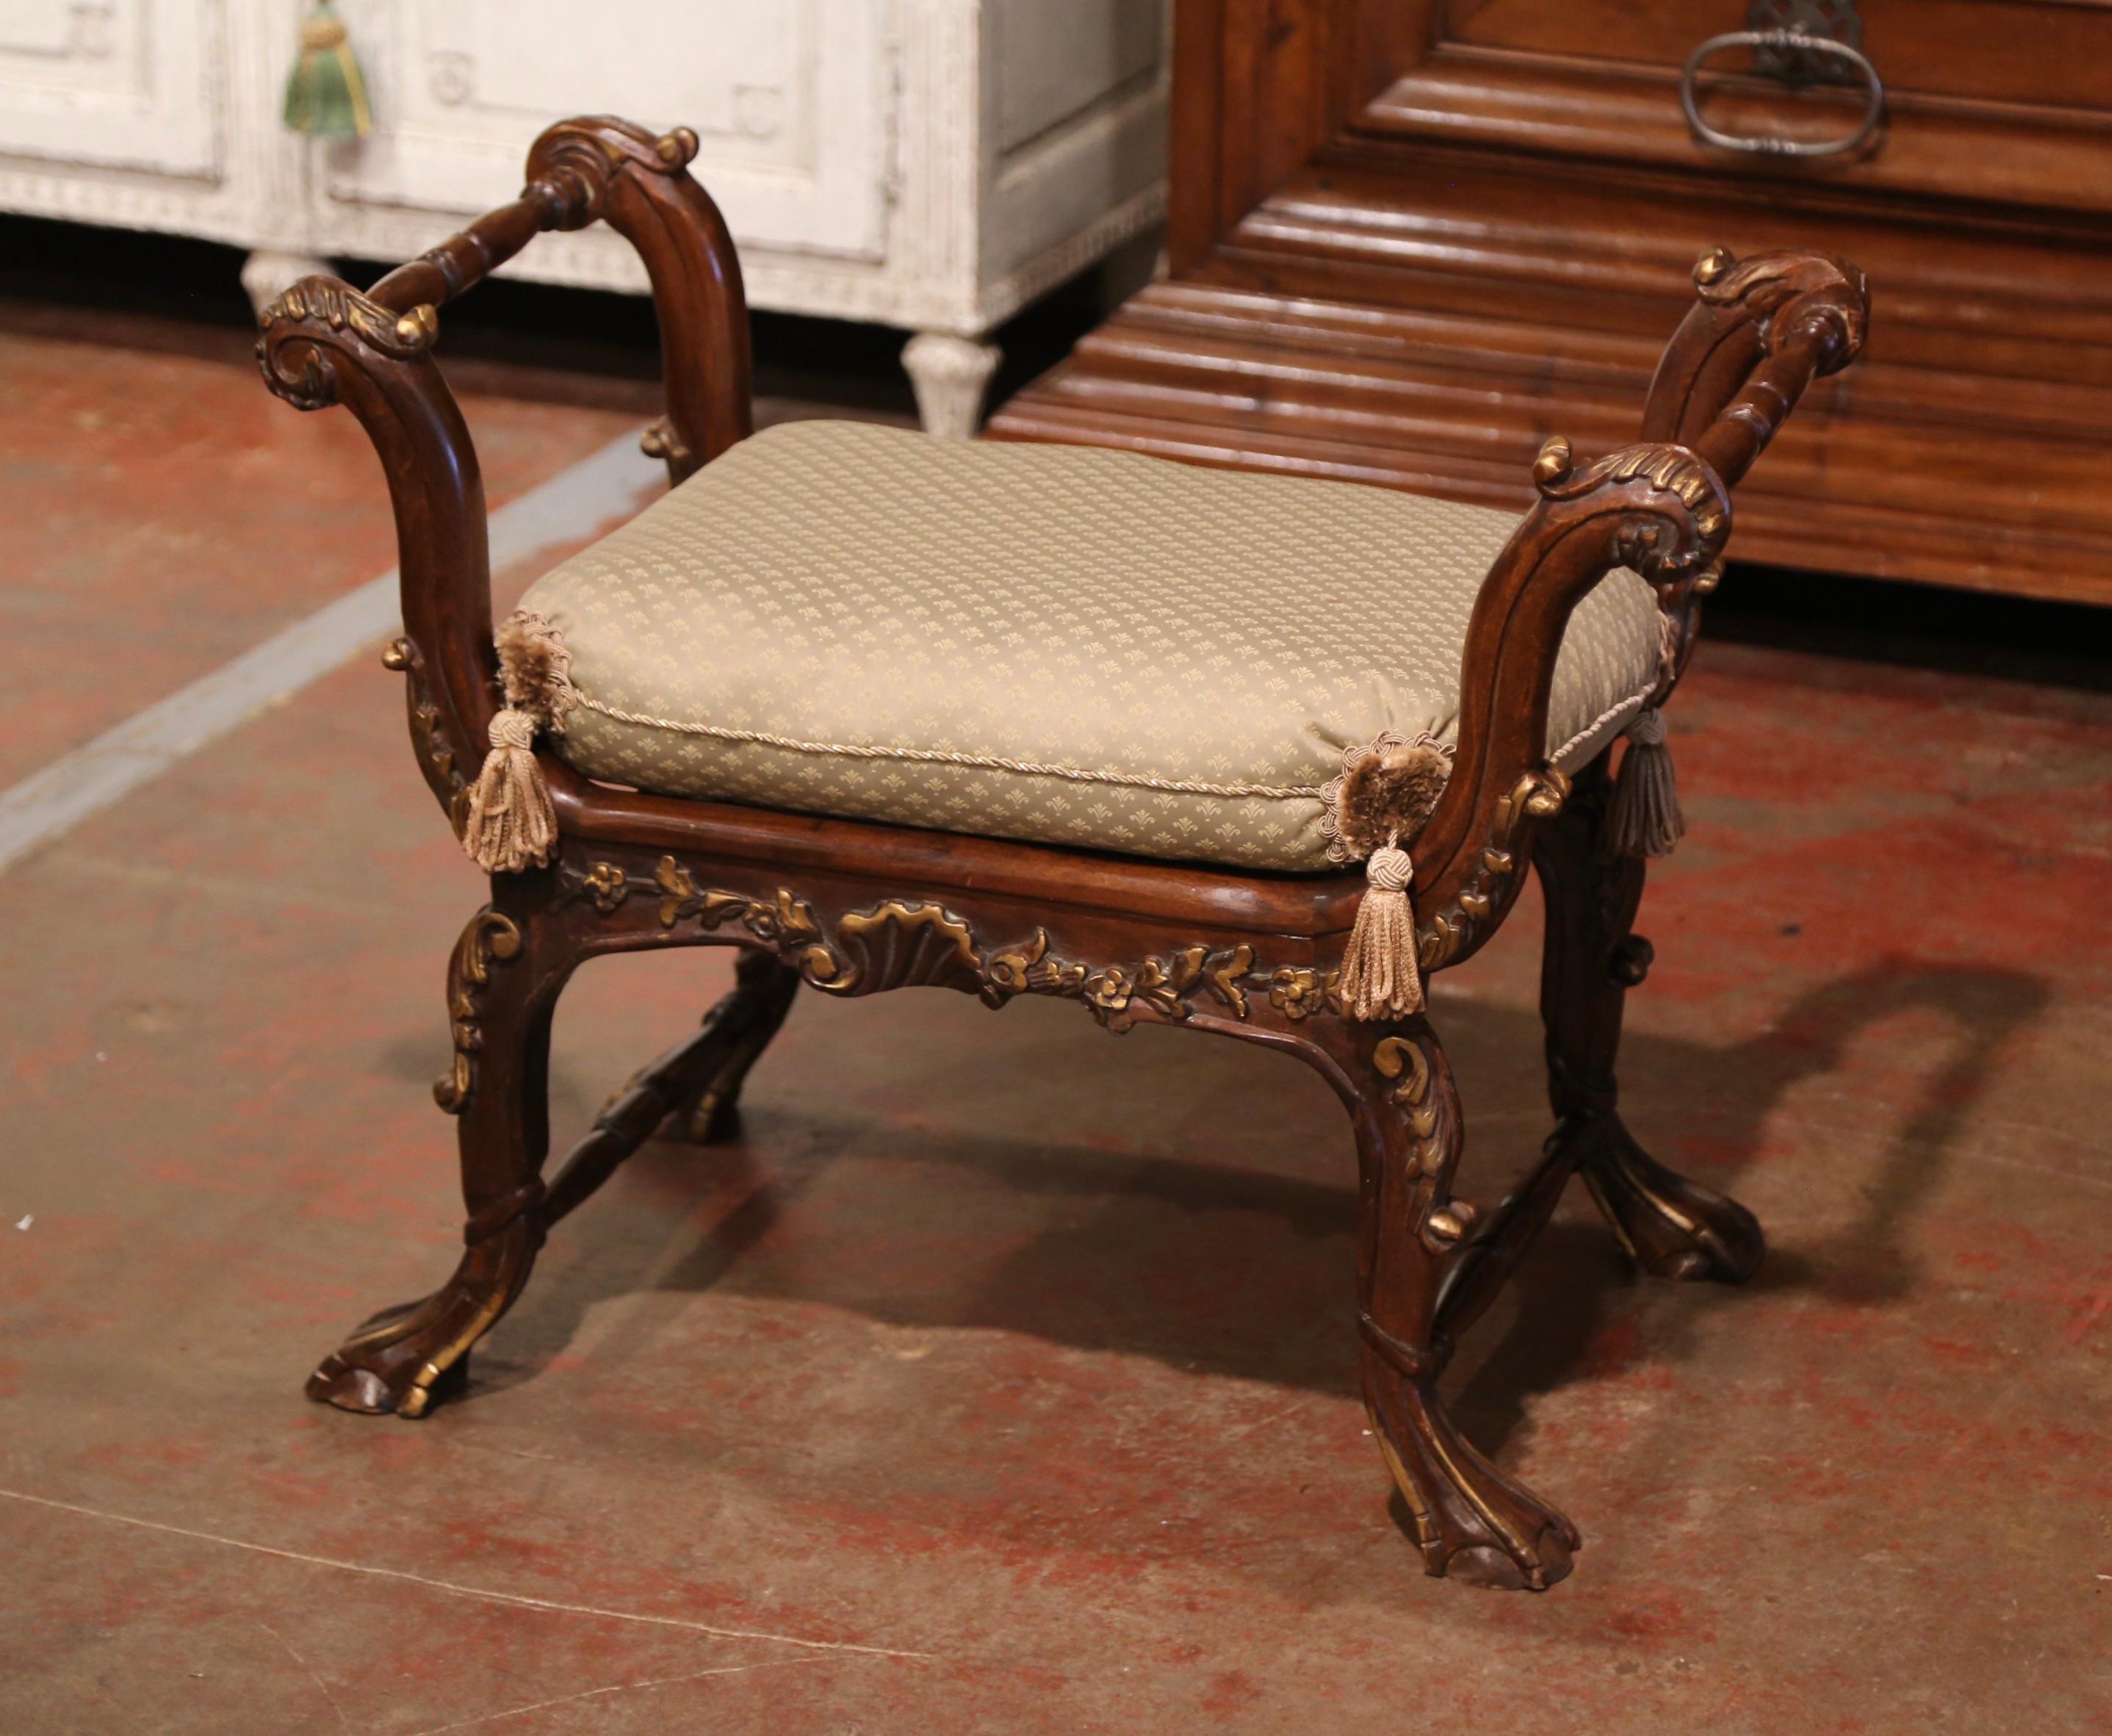 This elegant fruit wood bench was crafted in southern France, circa 1880. The antique chair stands on cabriole legs decorated with acanthus leaf motifs at the shoulder, and ending with claw feet. The scalloped apron is embellished with carved floral